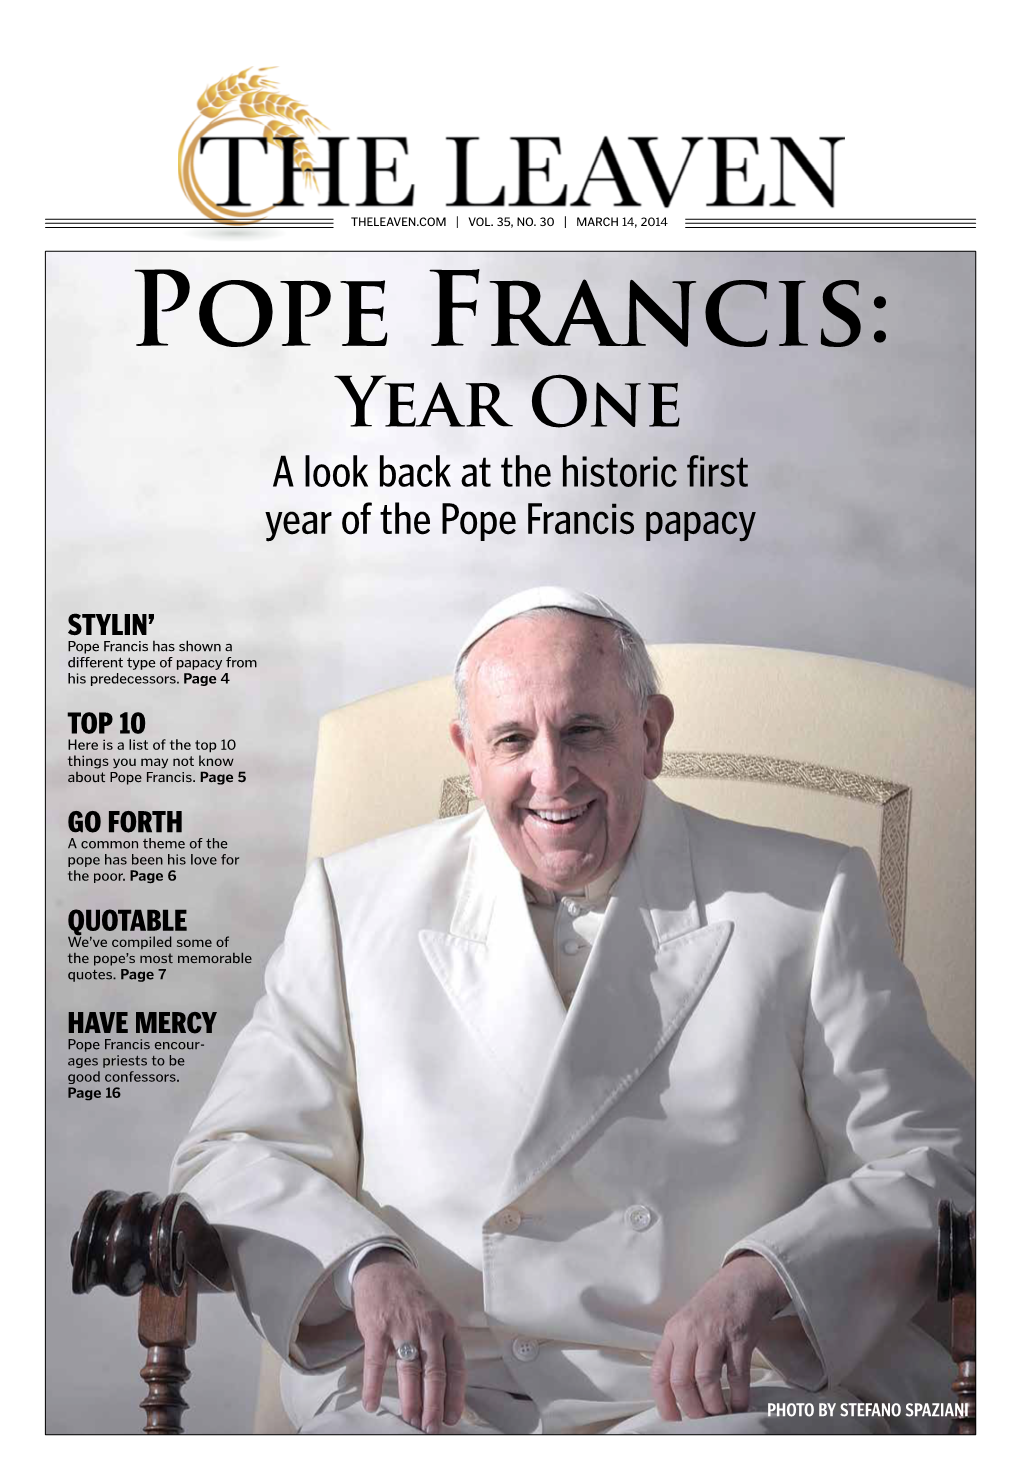 Year One a Look Back at the Historic First Year of the Pope Francis Papacy